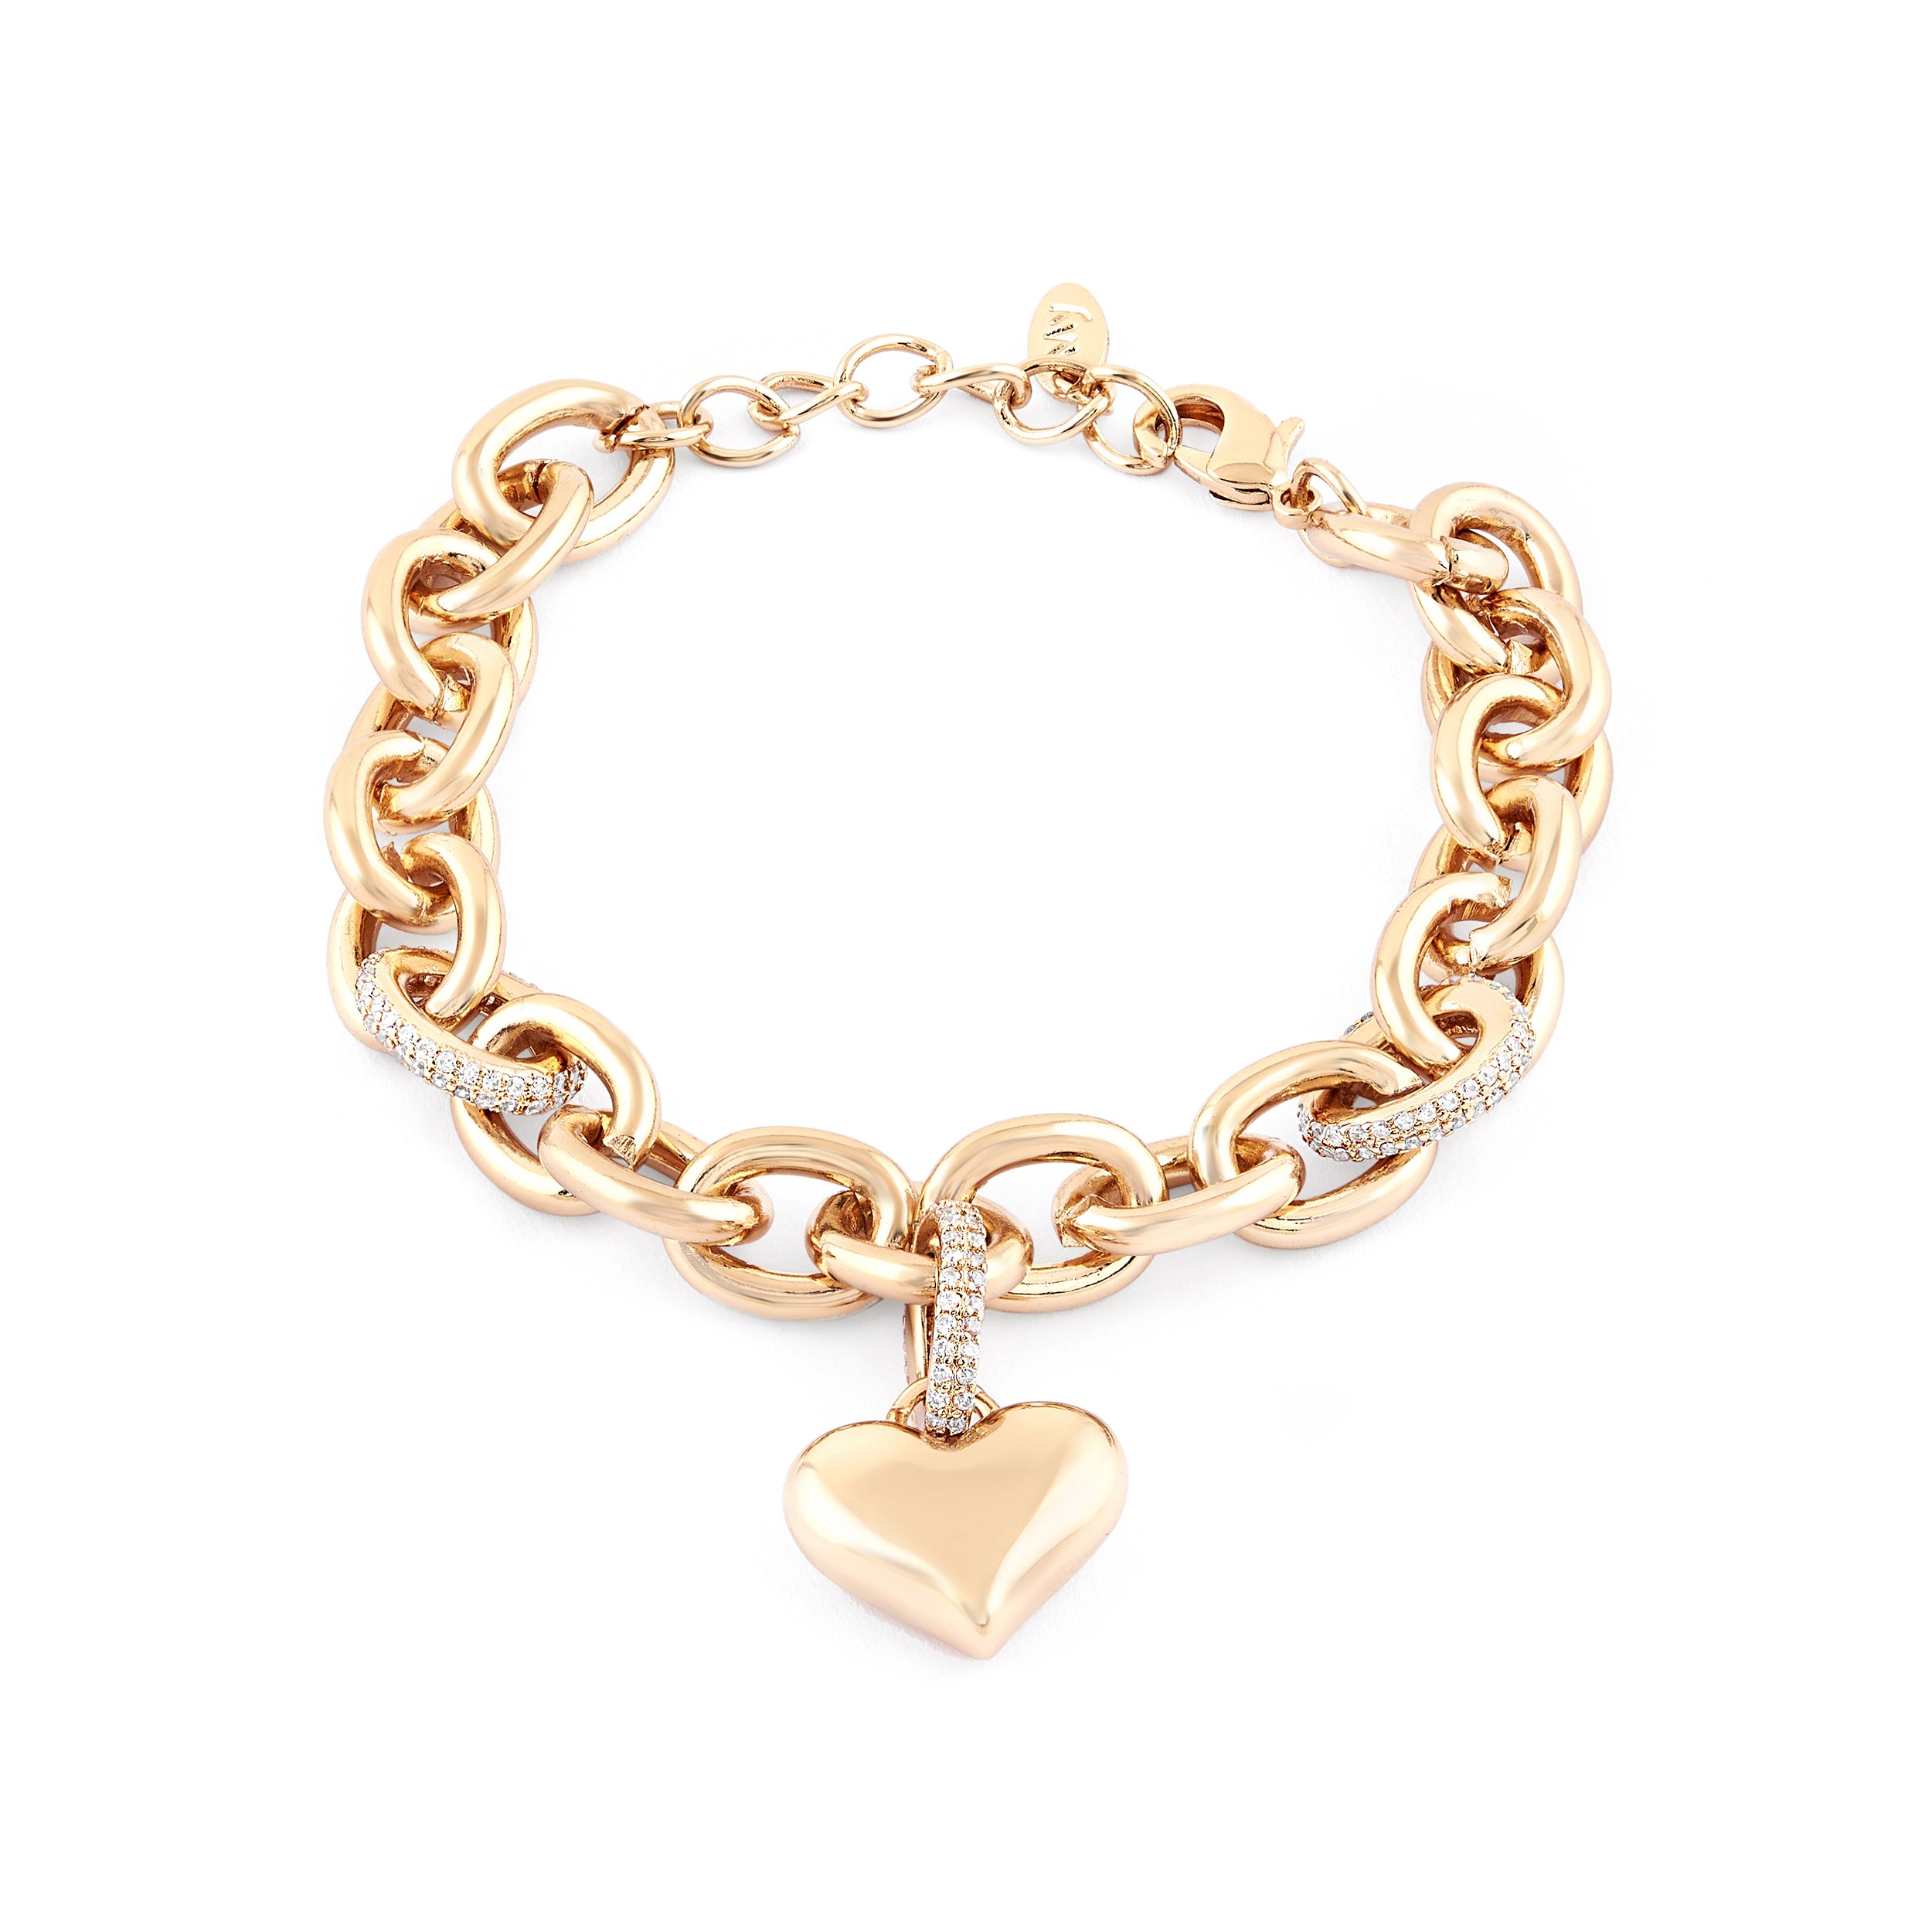 Personalized Heart Charm Bracelet in Sterling Silver | Forever My